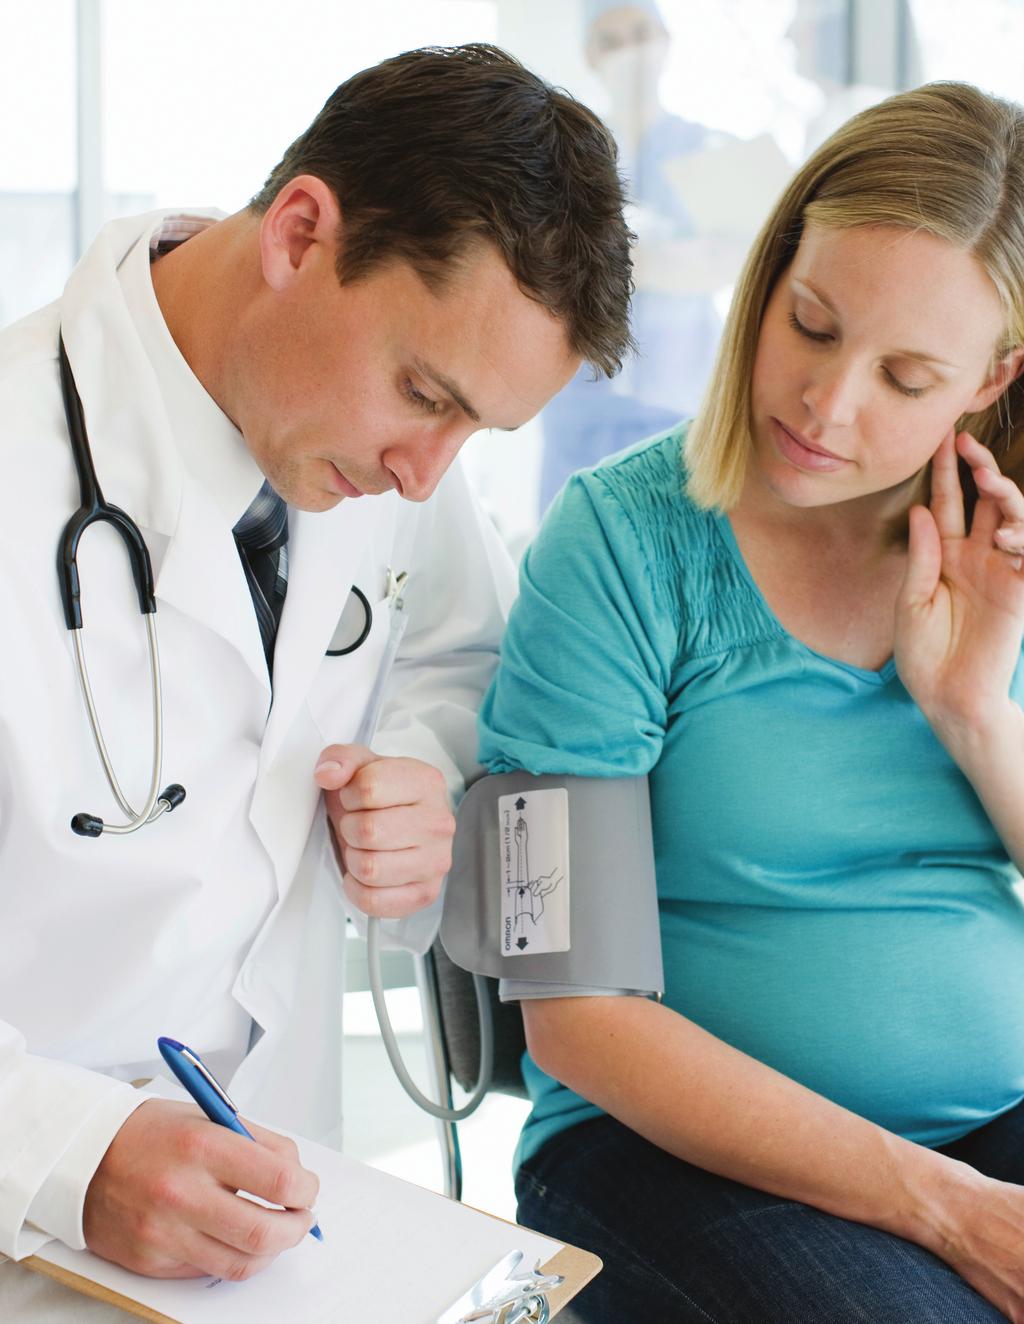 Pregnant women* Pregnant women should see their doctor or OB/GYN in their first three of pregnancy for a first visit and to set up a prenatal care plan.